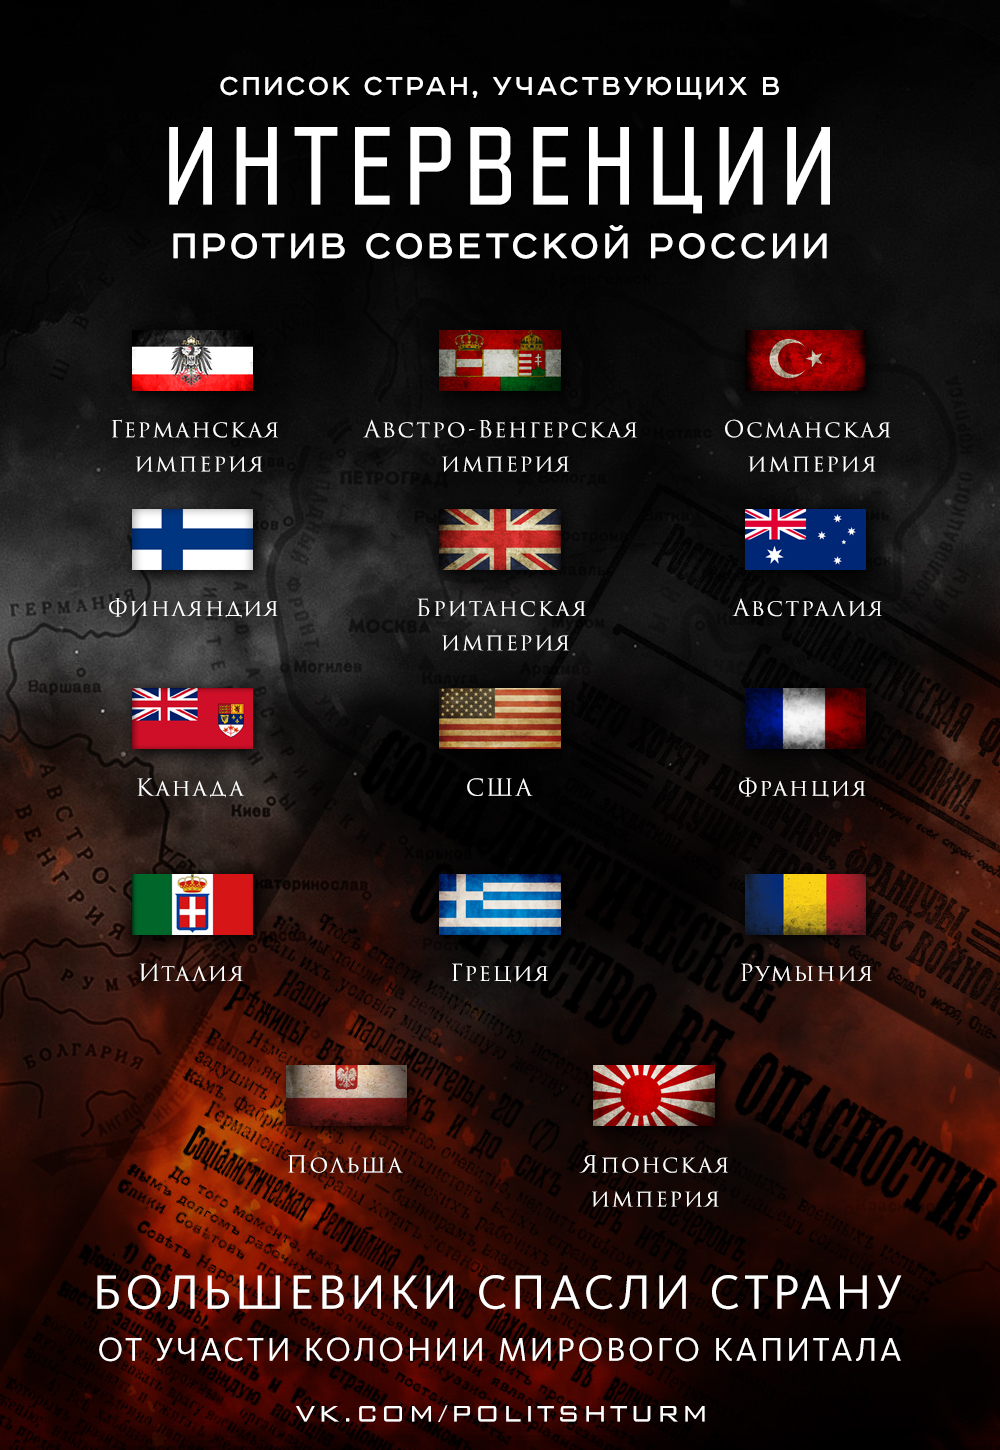 List of countries participating in the intervention against Soviet Russia - My, Intervention, Russia, Bolsheviks, Socialism, Capitalism, RSFSR, Political assault